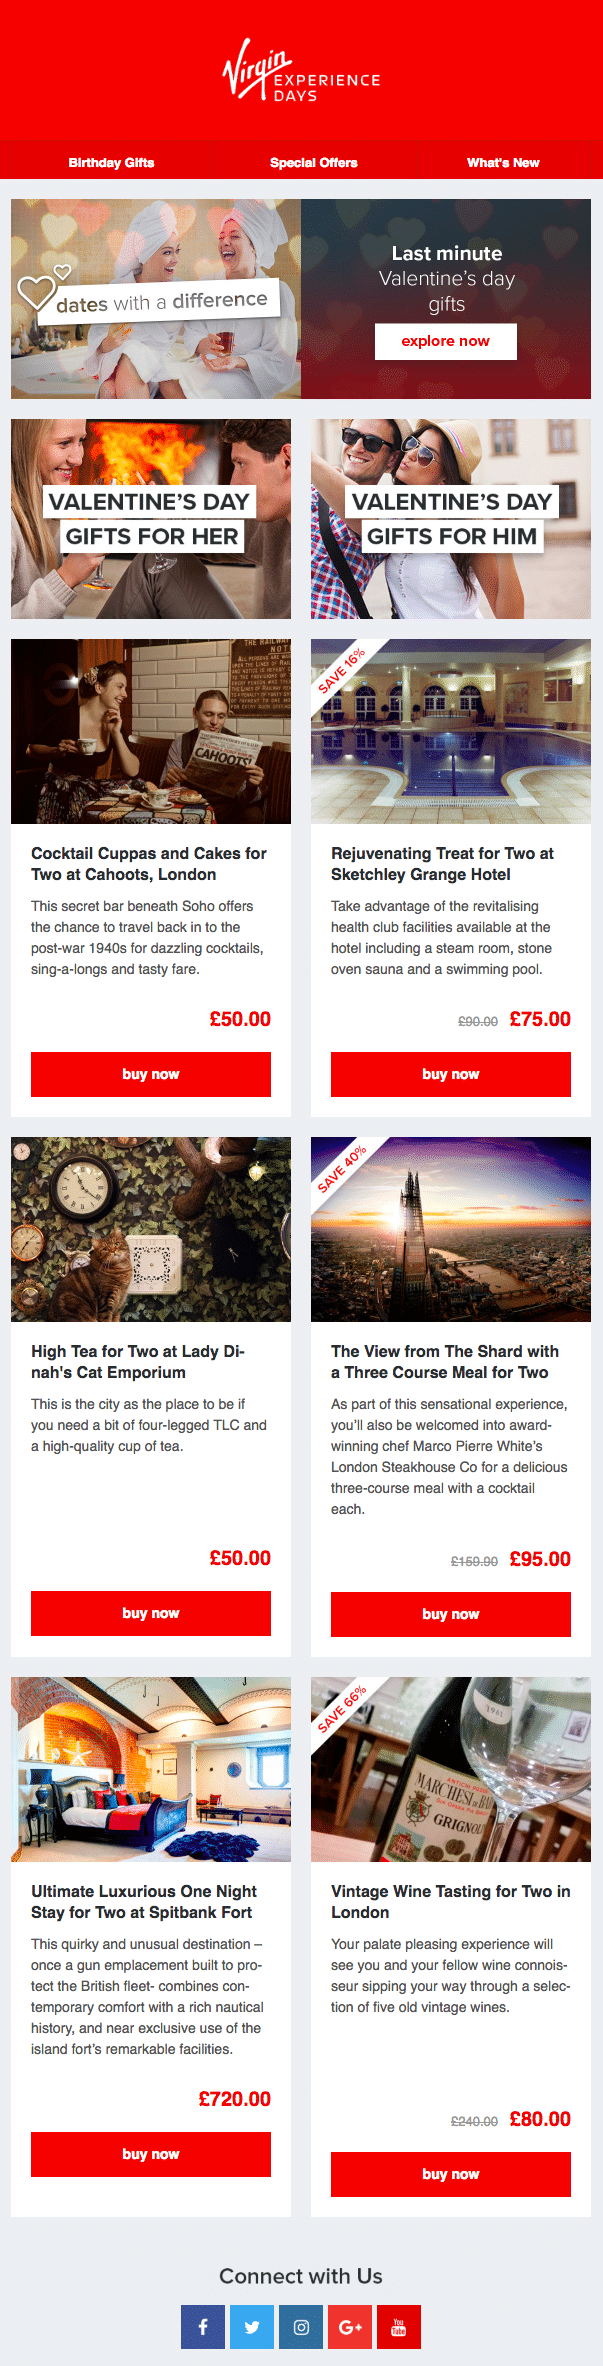 Virgin Experience – Holiday Email Marketing - Vday